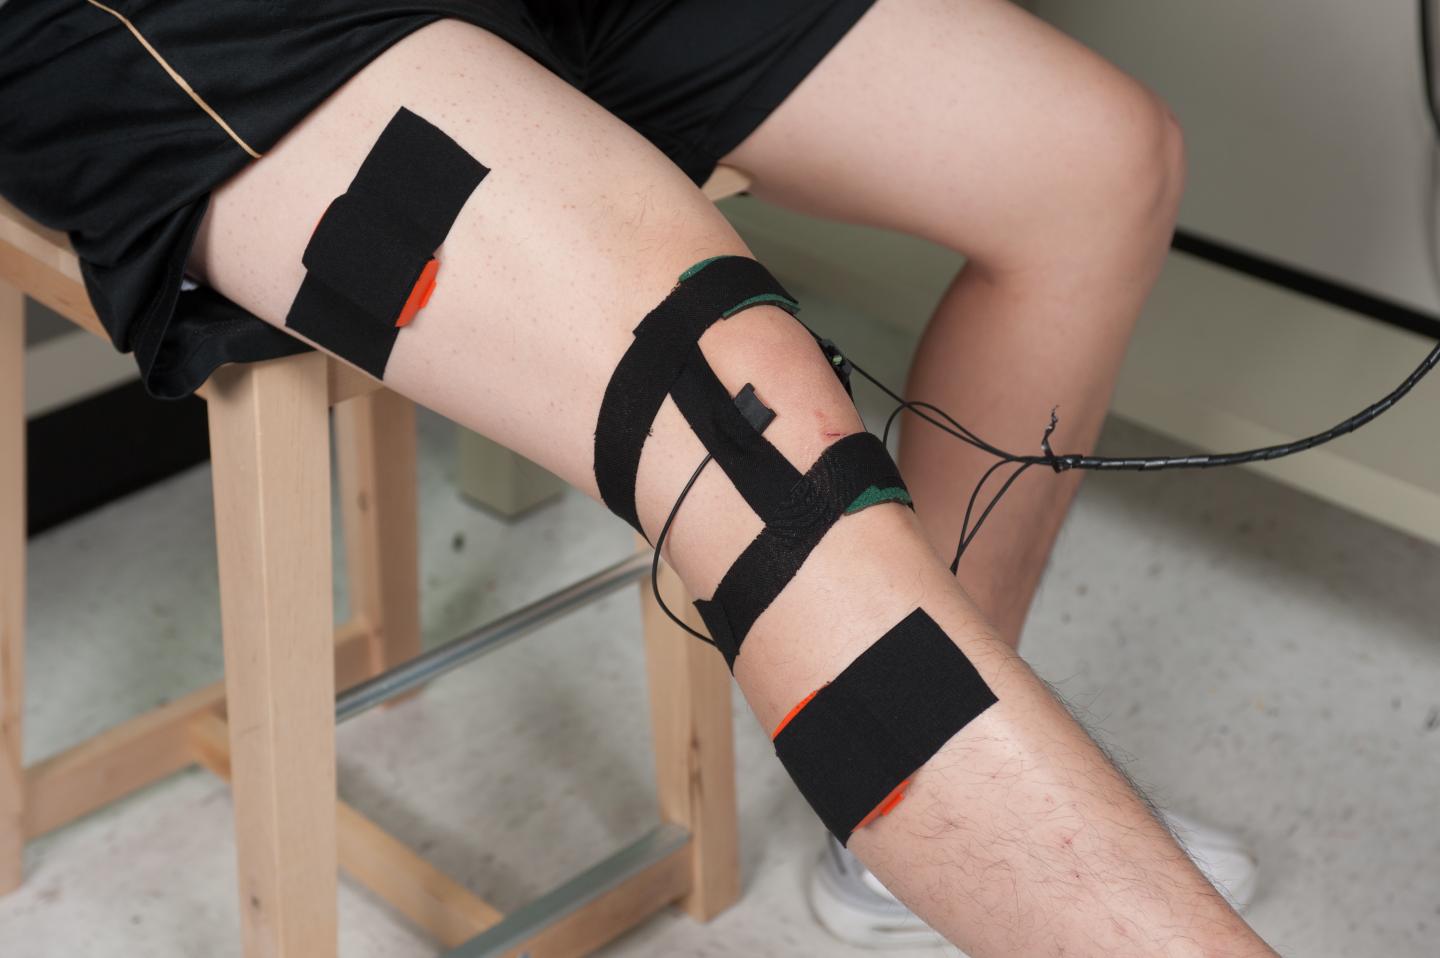 Listening Devices Detect Vibrations in Moving Knee